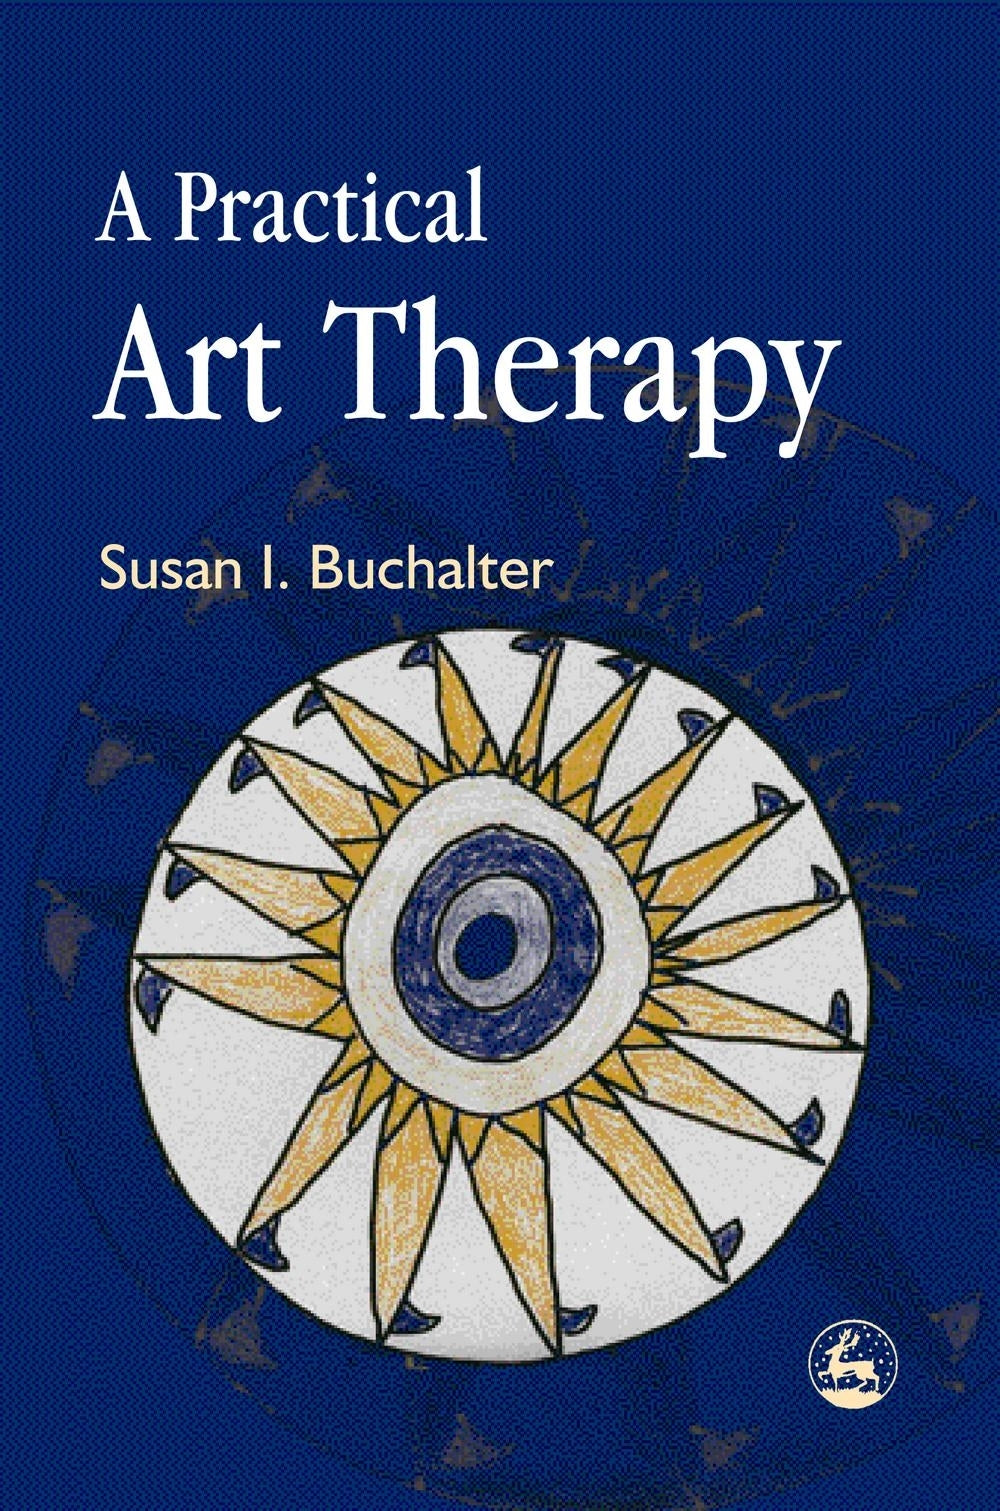 A Practical Art Therapy by Susan Buchalter